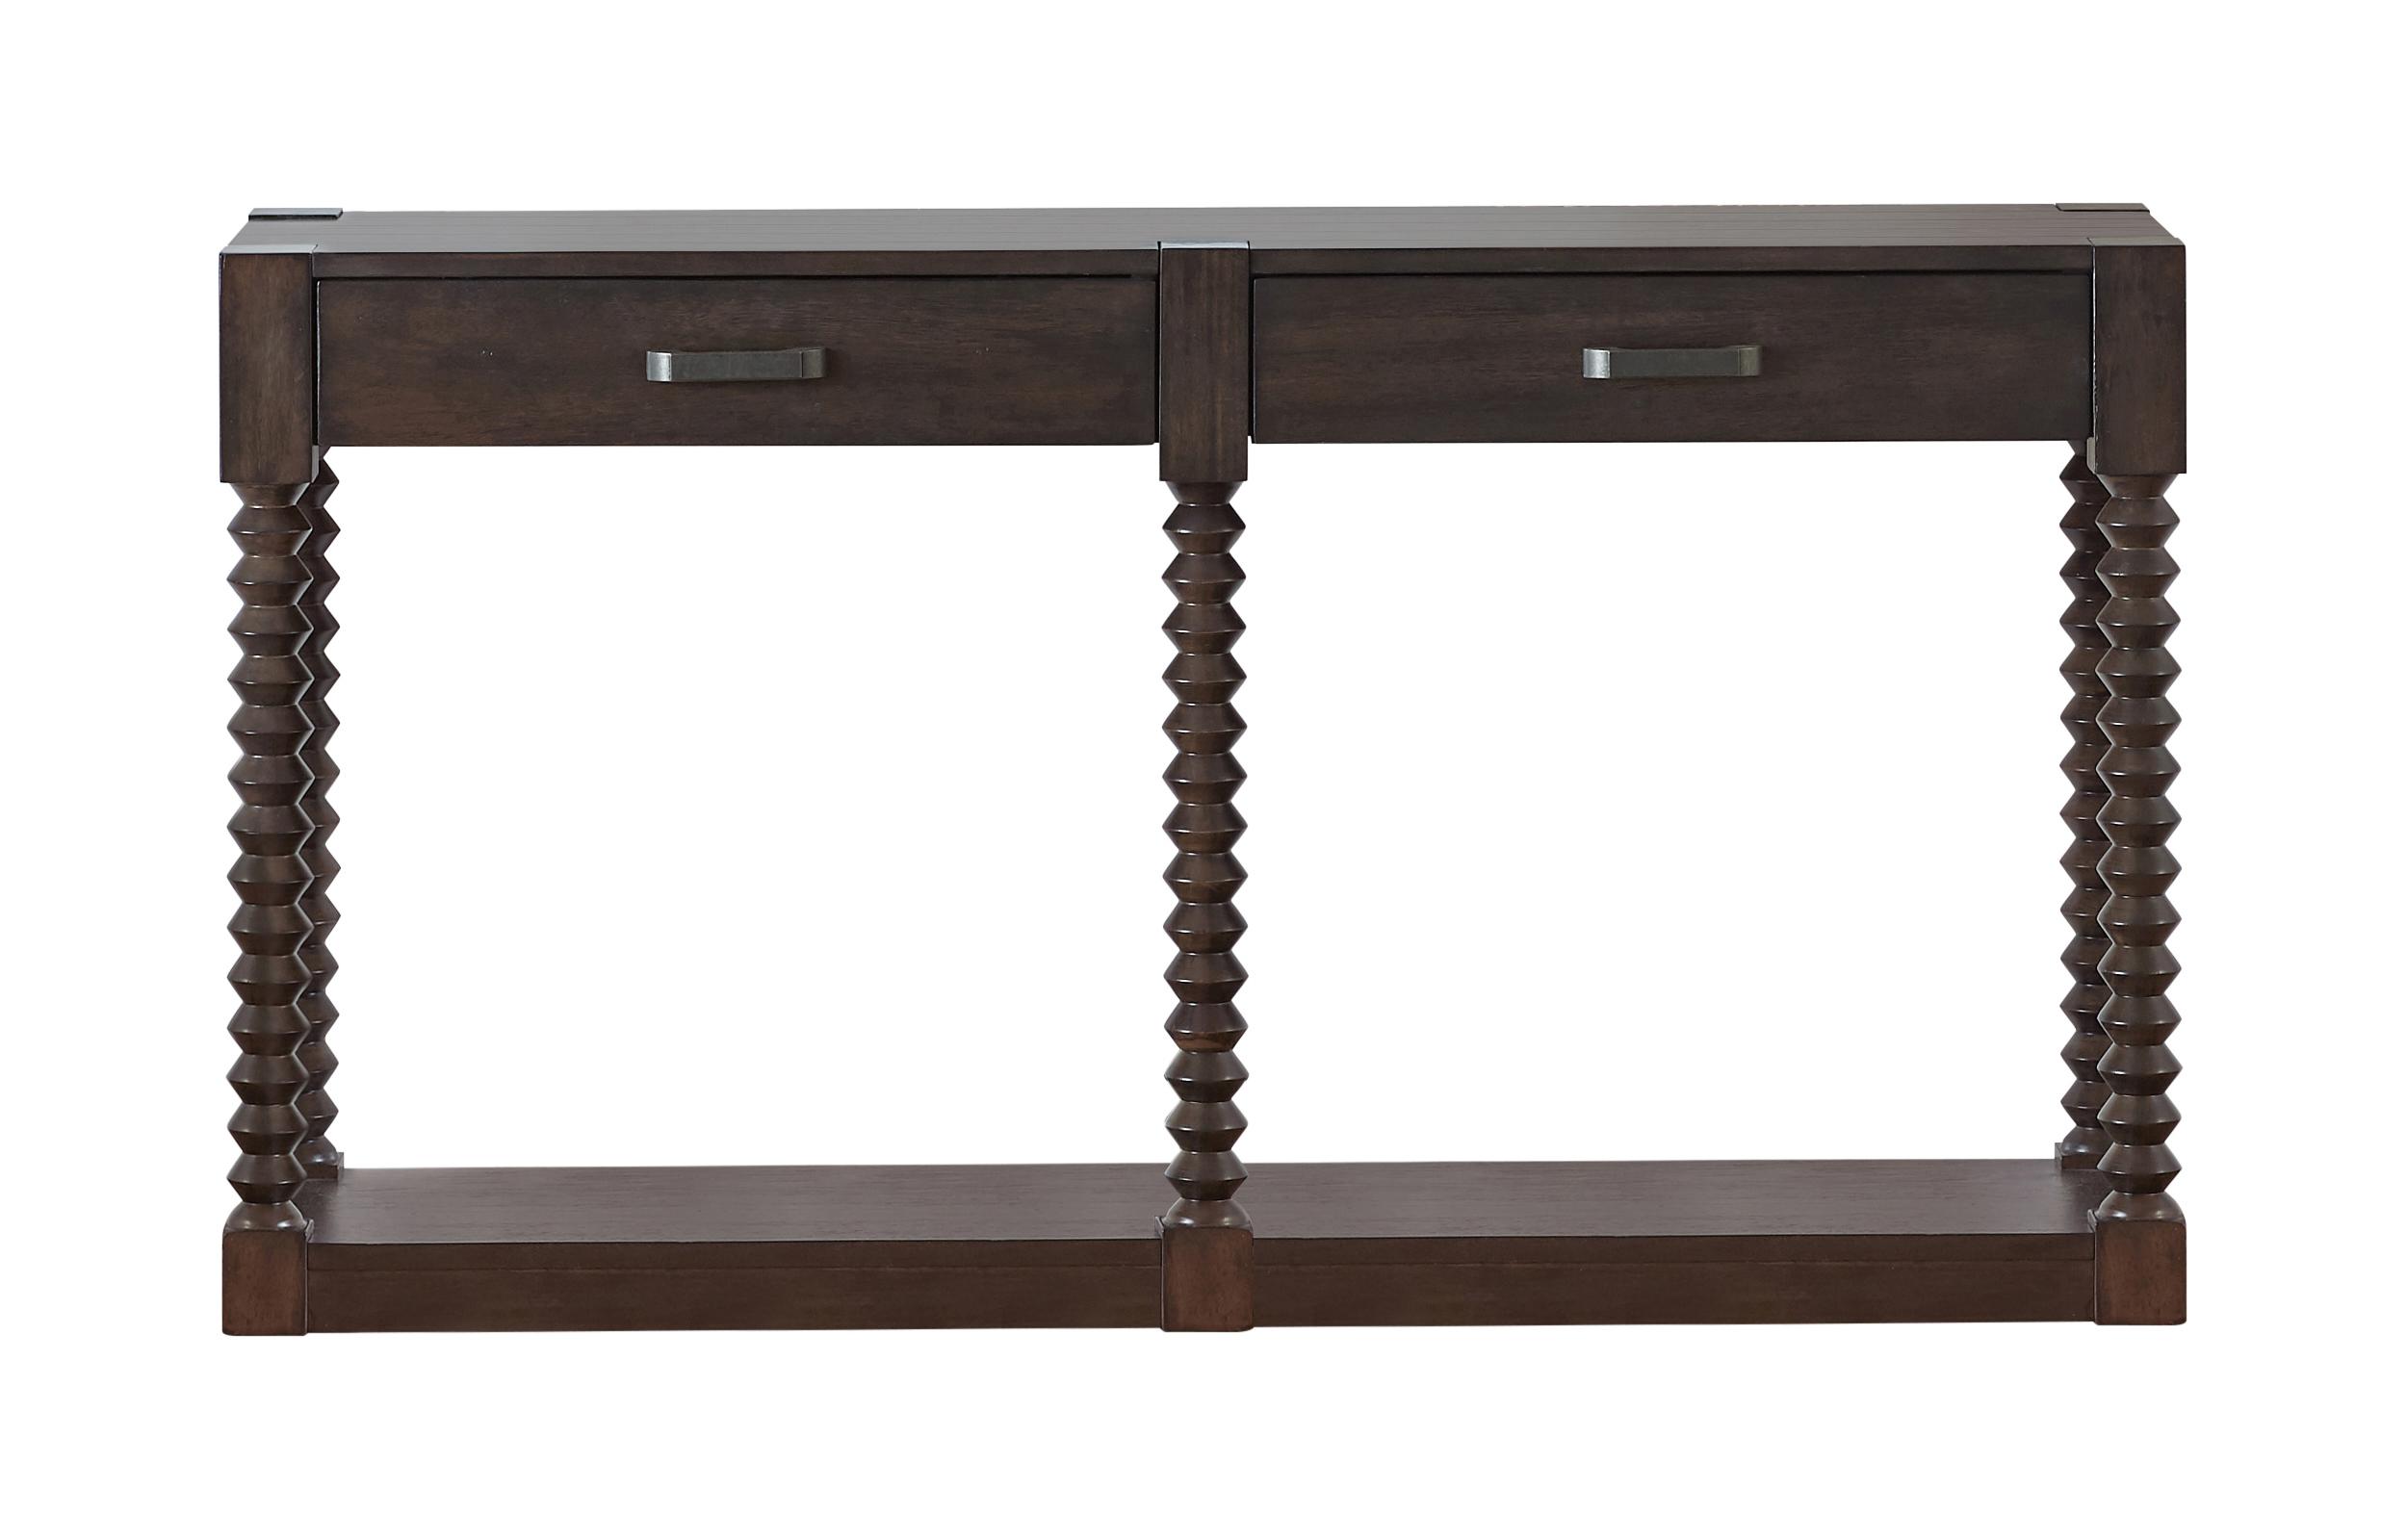 Transitional Sofa Table 722579 722579 in Coffee 